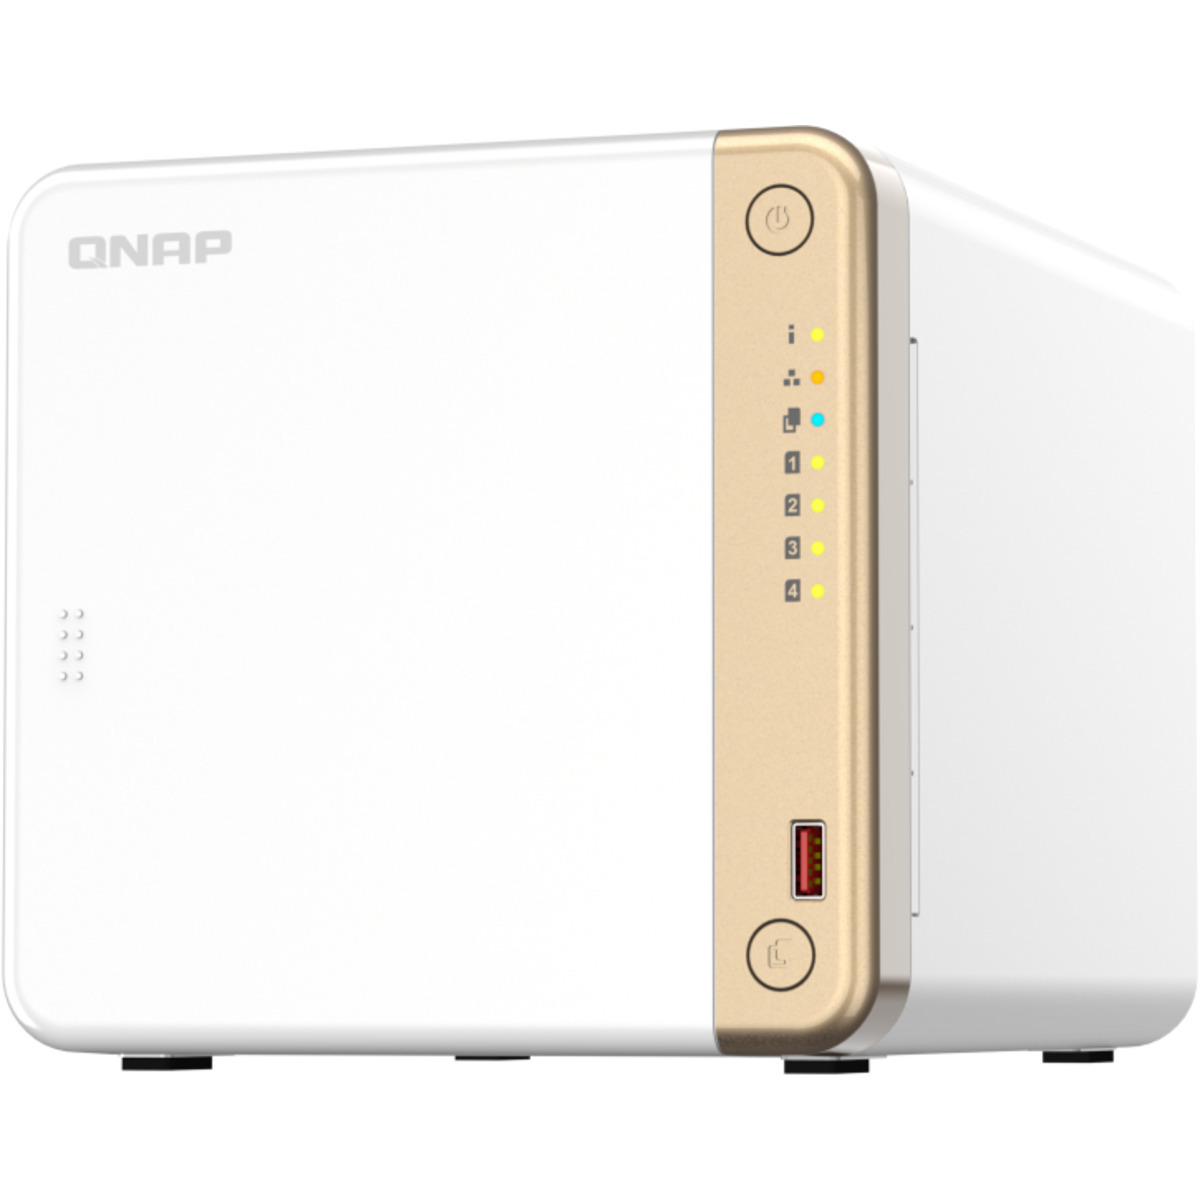 QNAP TS-462 56tb 4-Bay Desktop Multimedia / Power User / Business NAS - Network Attached Storage Device 4x14tb Seagate IronWolf Pro ST14000NT001 3.5 7200rpm SATA 6Gb/s HDD NAS Class Drives Installed - Burn-In Tested - ON SALE TS-462